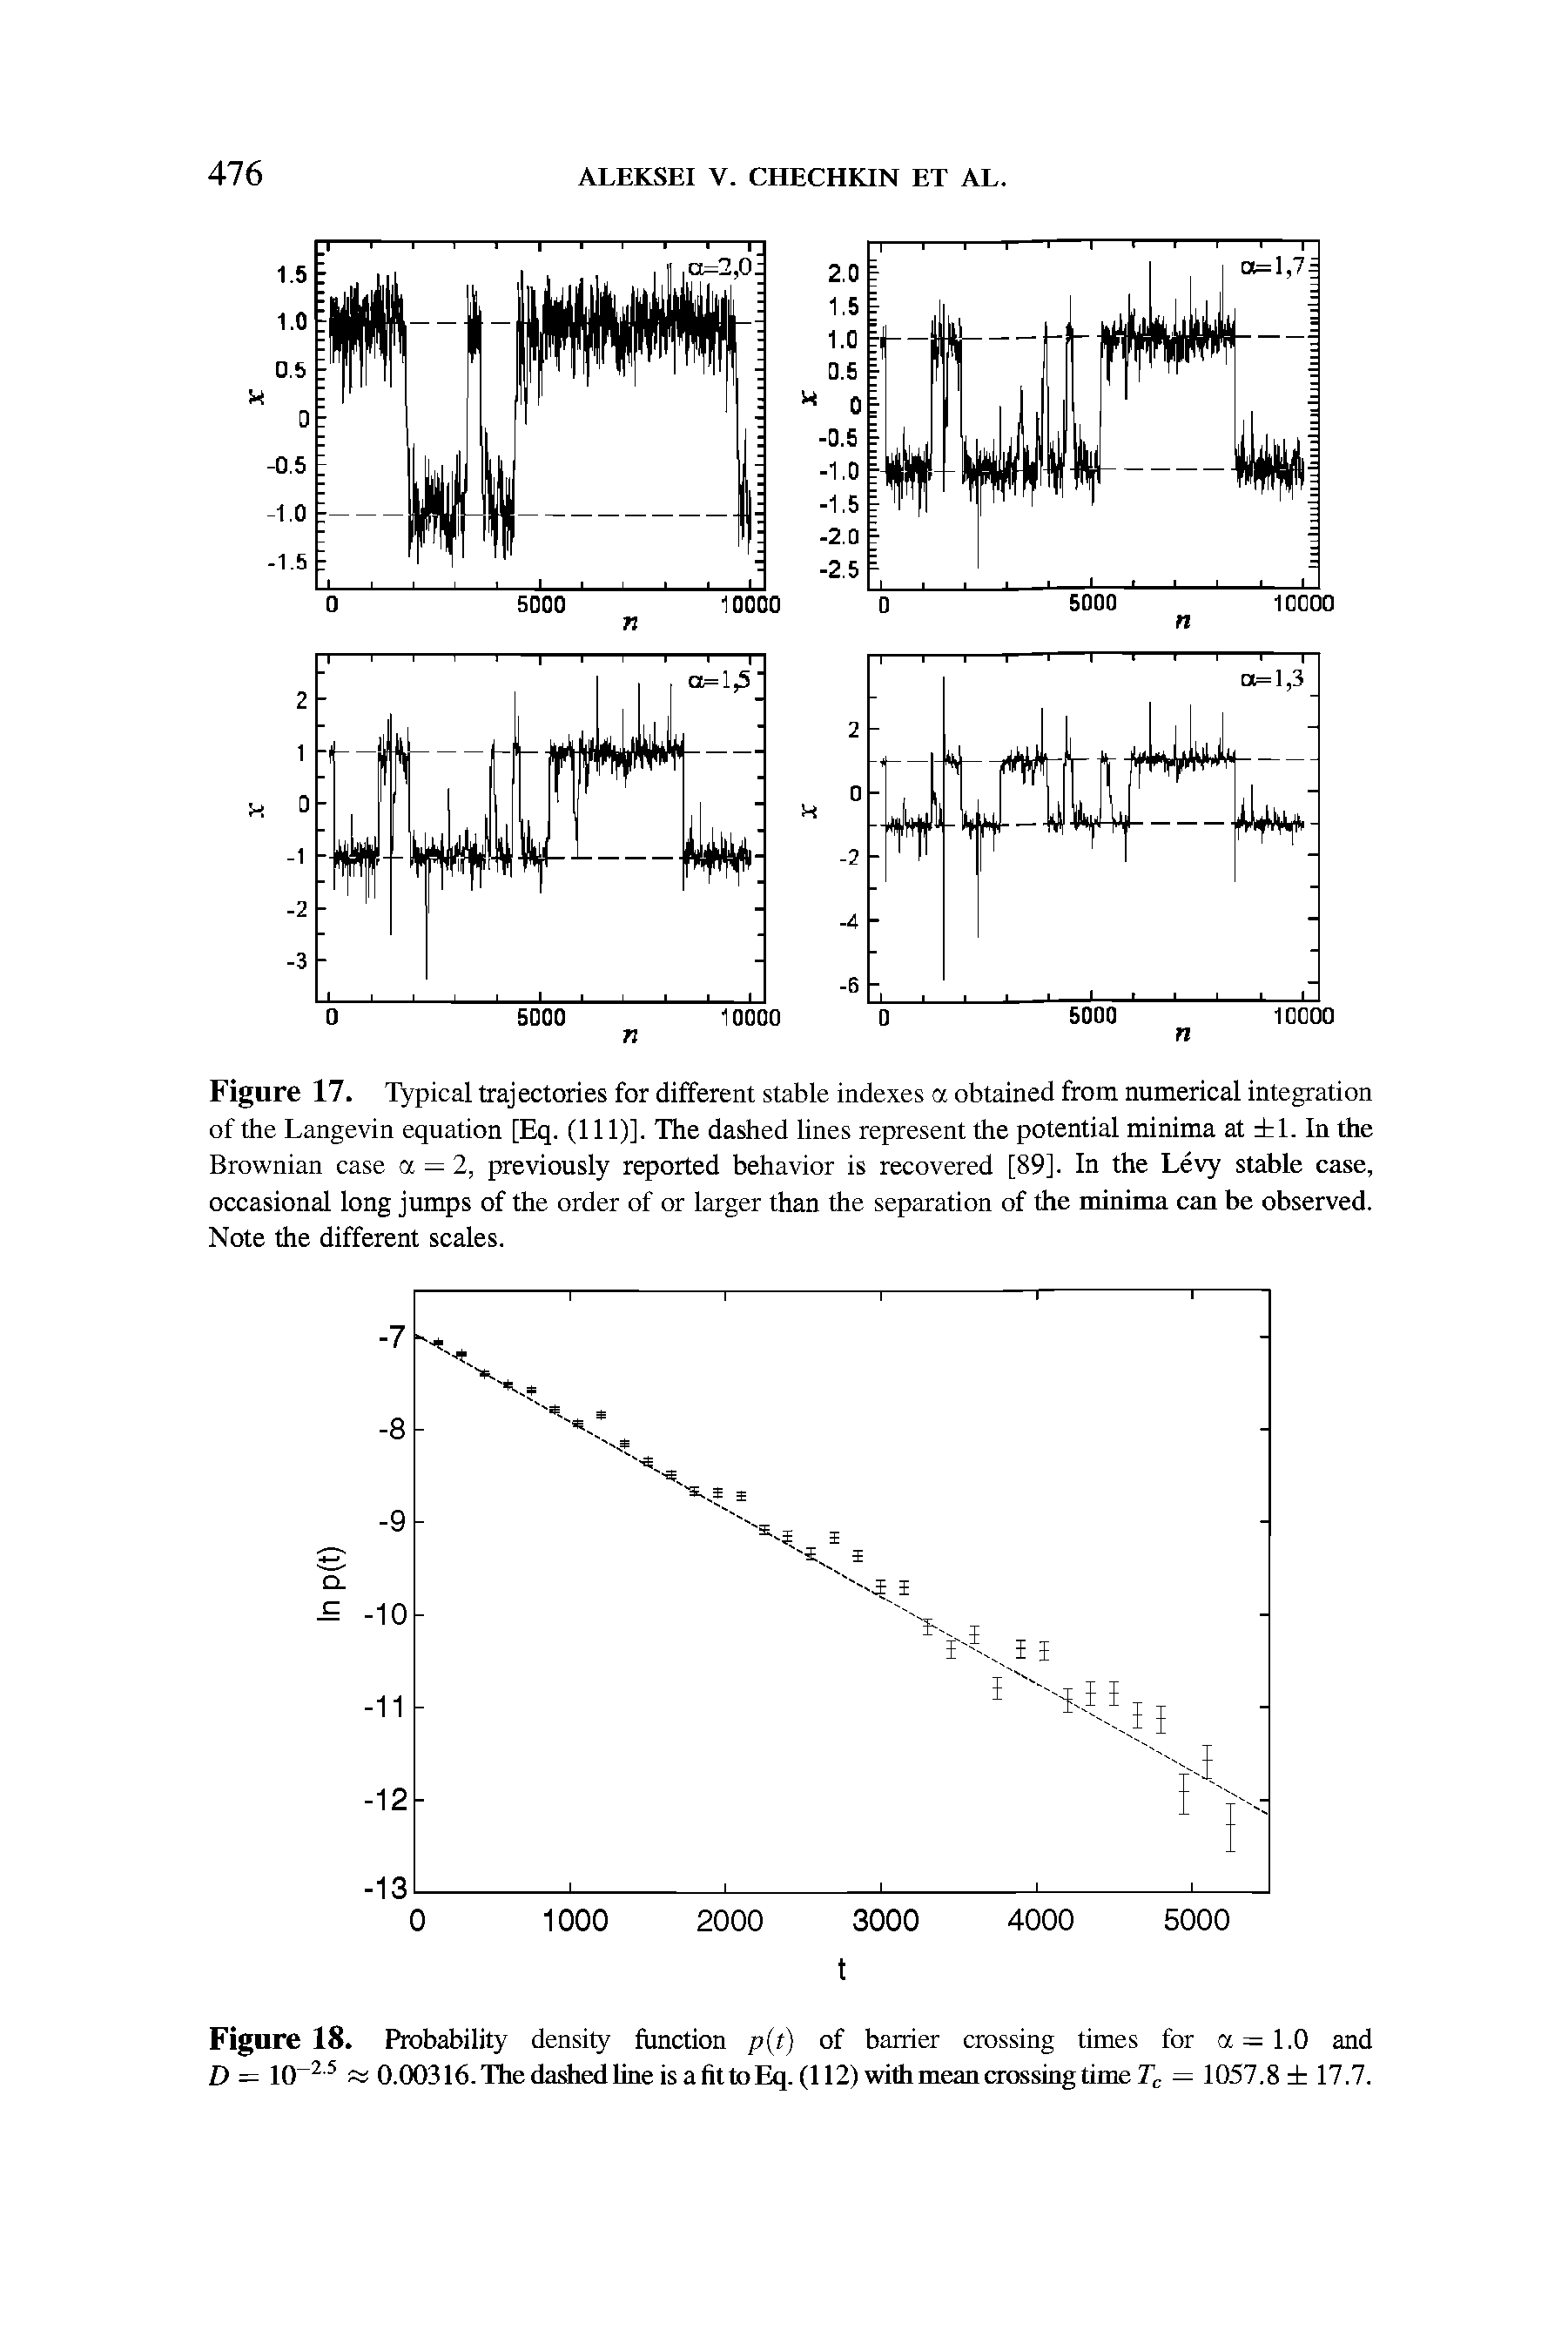 Figure 17. Typical trajectories for different stable indexes a obtained from numerical integration of the Langevin equation [Eq. (111)]. The dashed lines represent the potential minima at 1. In the Brownian case a = 2, previously reported behavior is recovered [89]. In the Levy stable case, occasional long jumps of the order of or larger than the separation of the minima can be observed. Note the different scales.